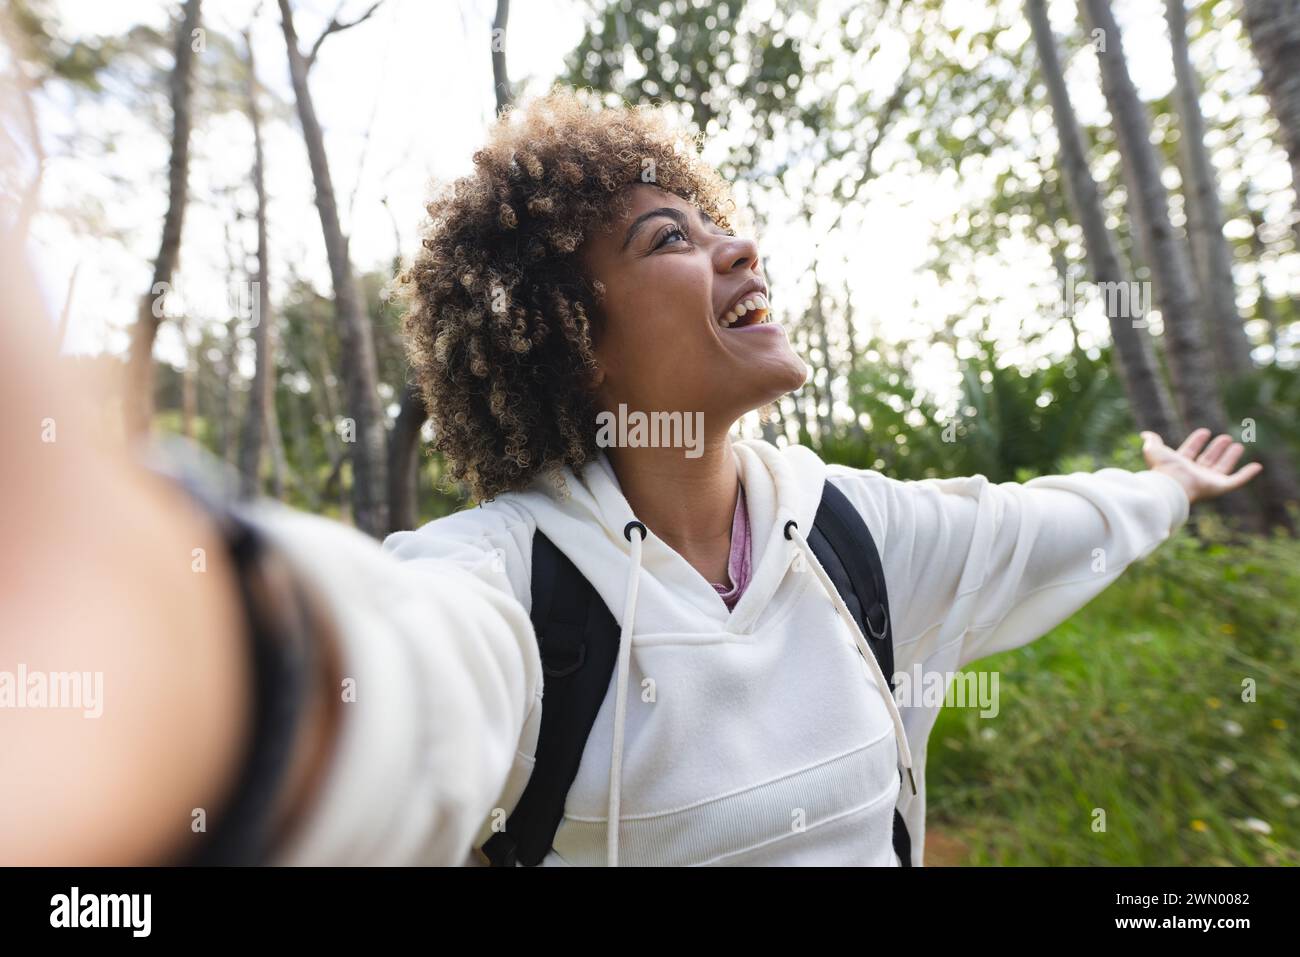 Young biracial woman with curly hair takes a selfie in the woods on a hike Stock Photo